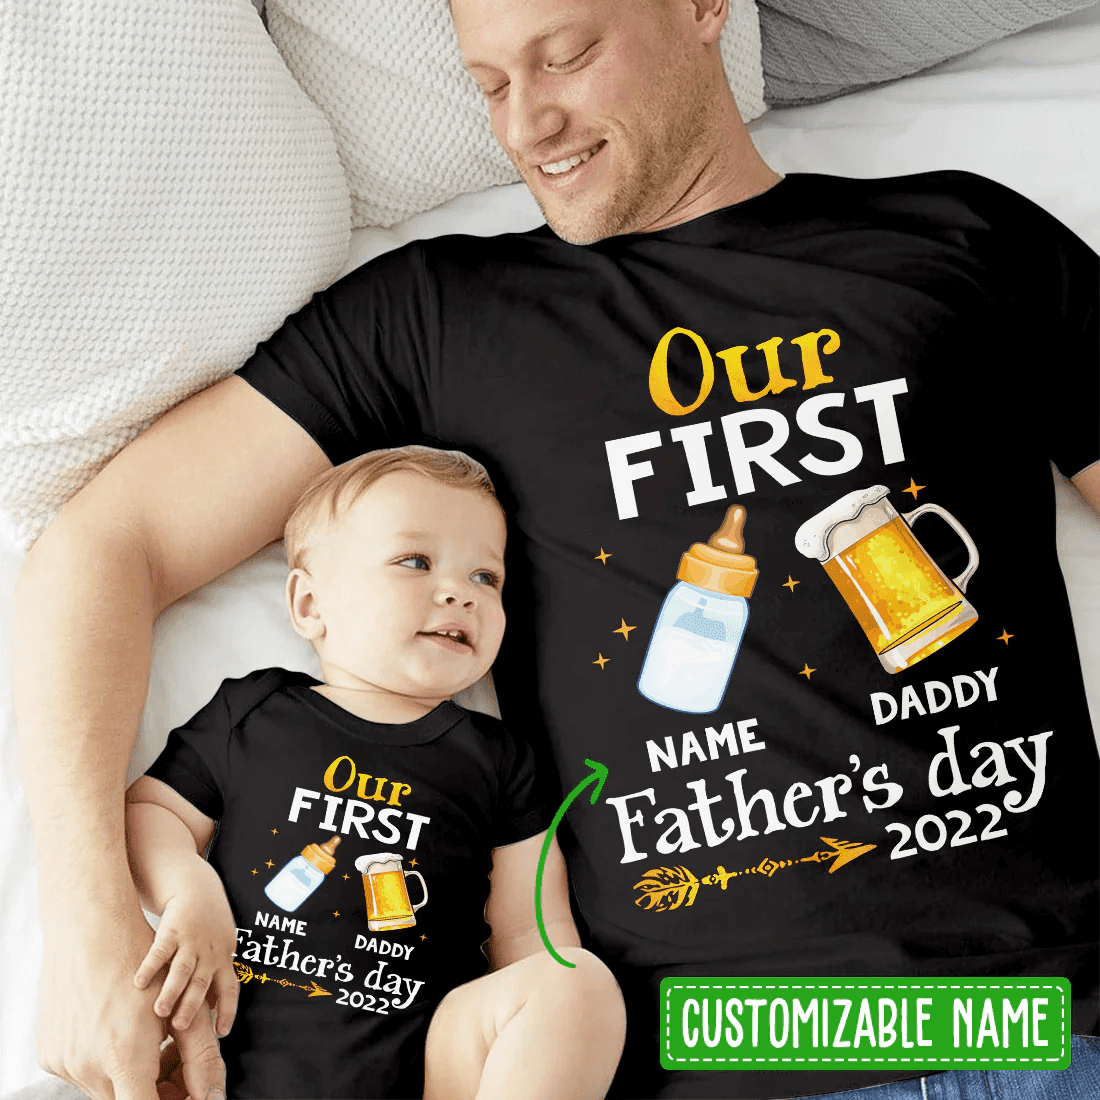 First Father's Day For New Dad Personalized Matching Shirt Onesie